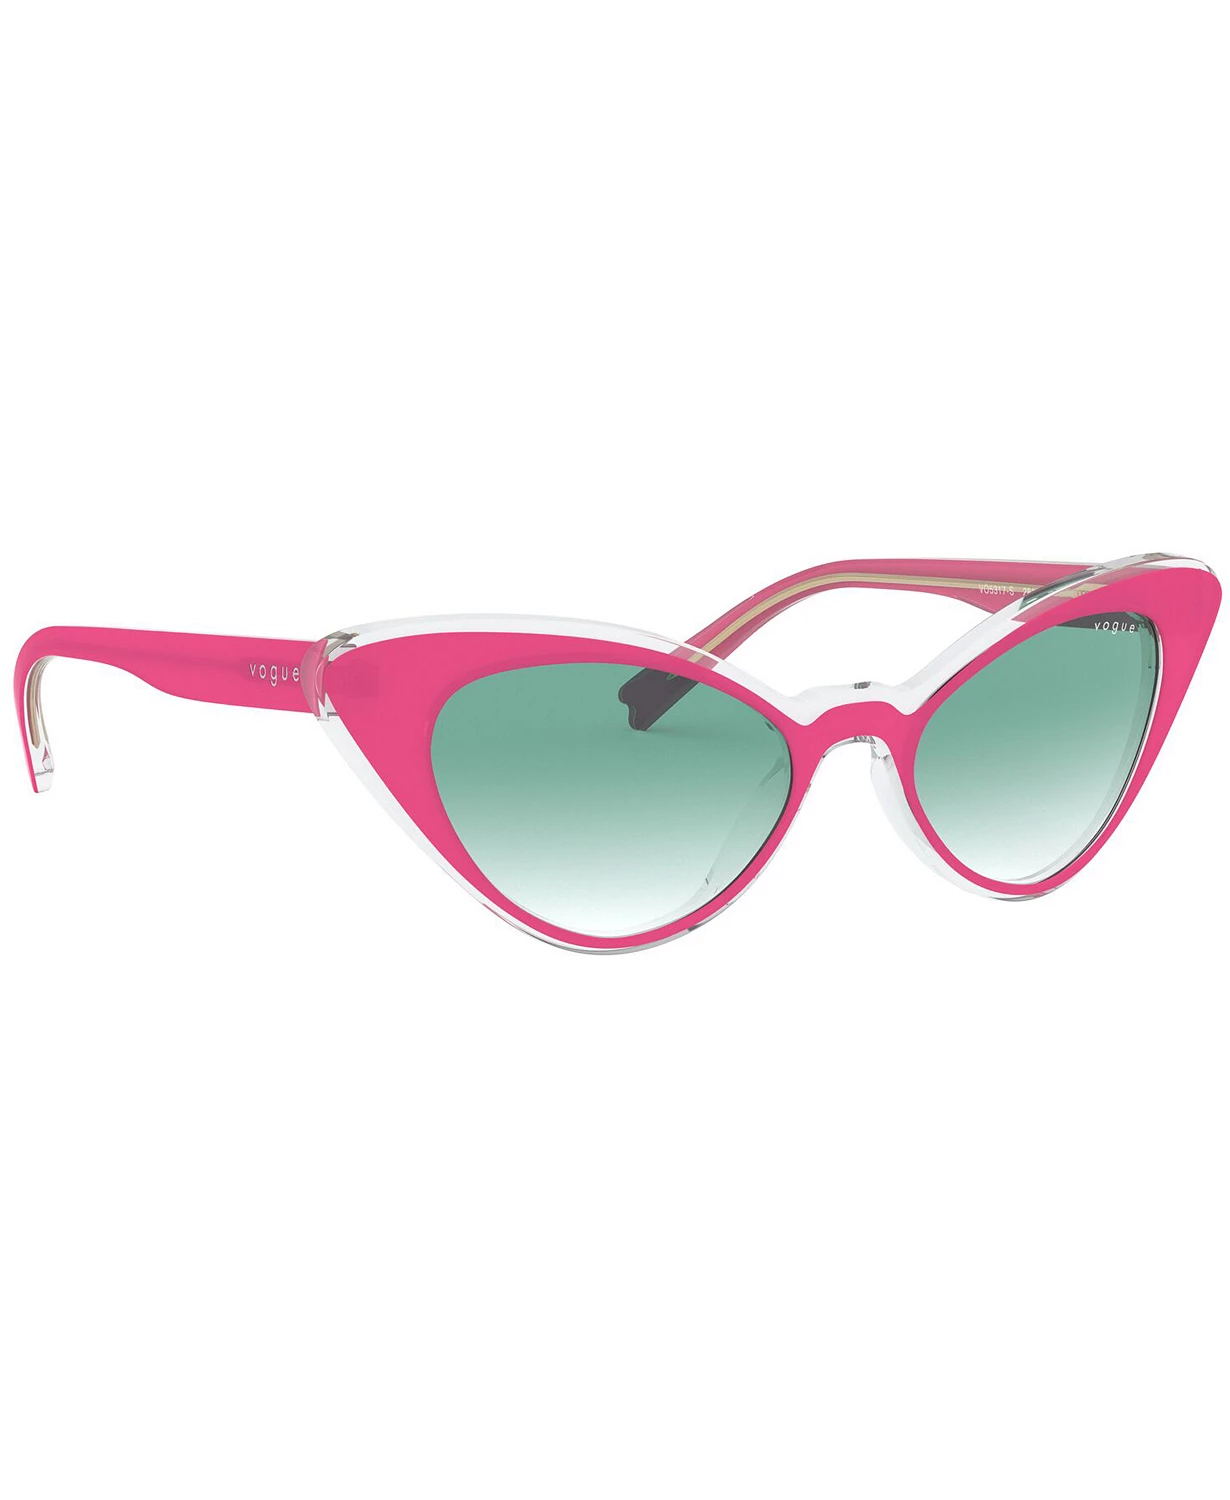 Vogue Pink Cat Eye Sunglasses with Gradient Lenses